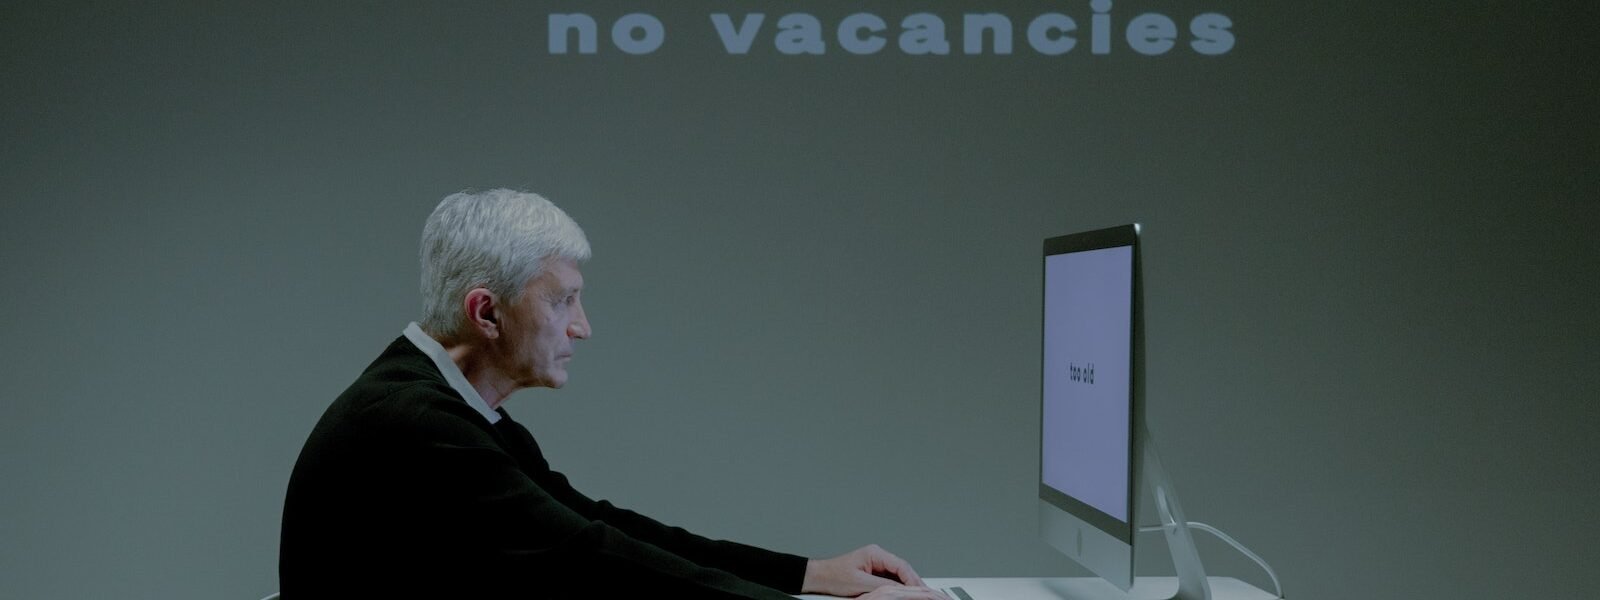 An Elderly Man with a Serious Face while using a Computer